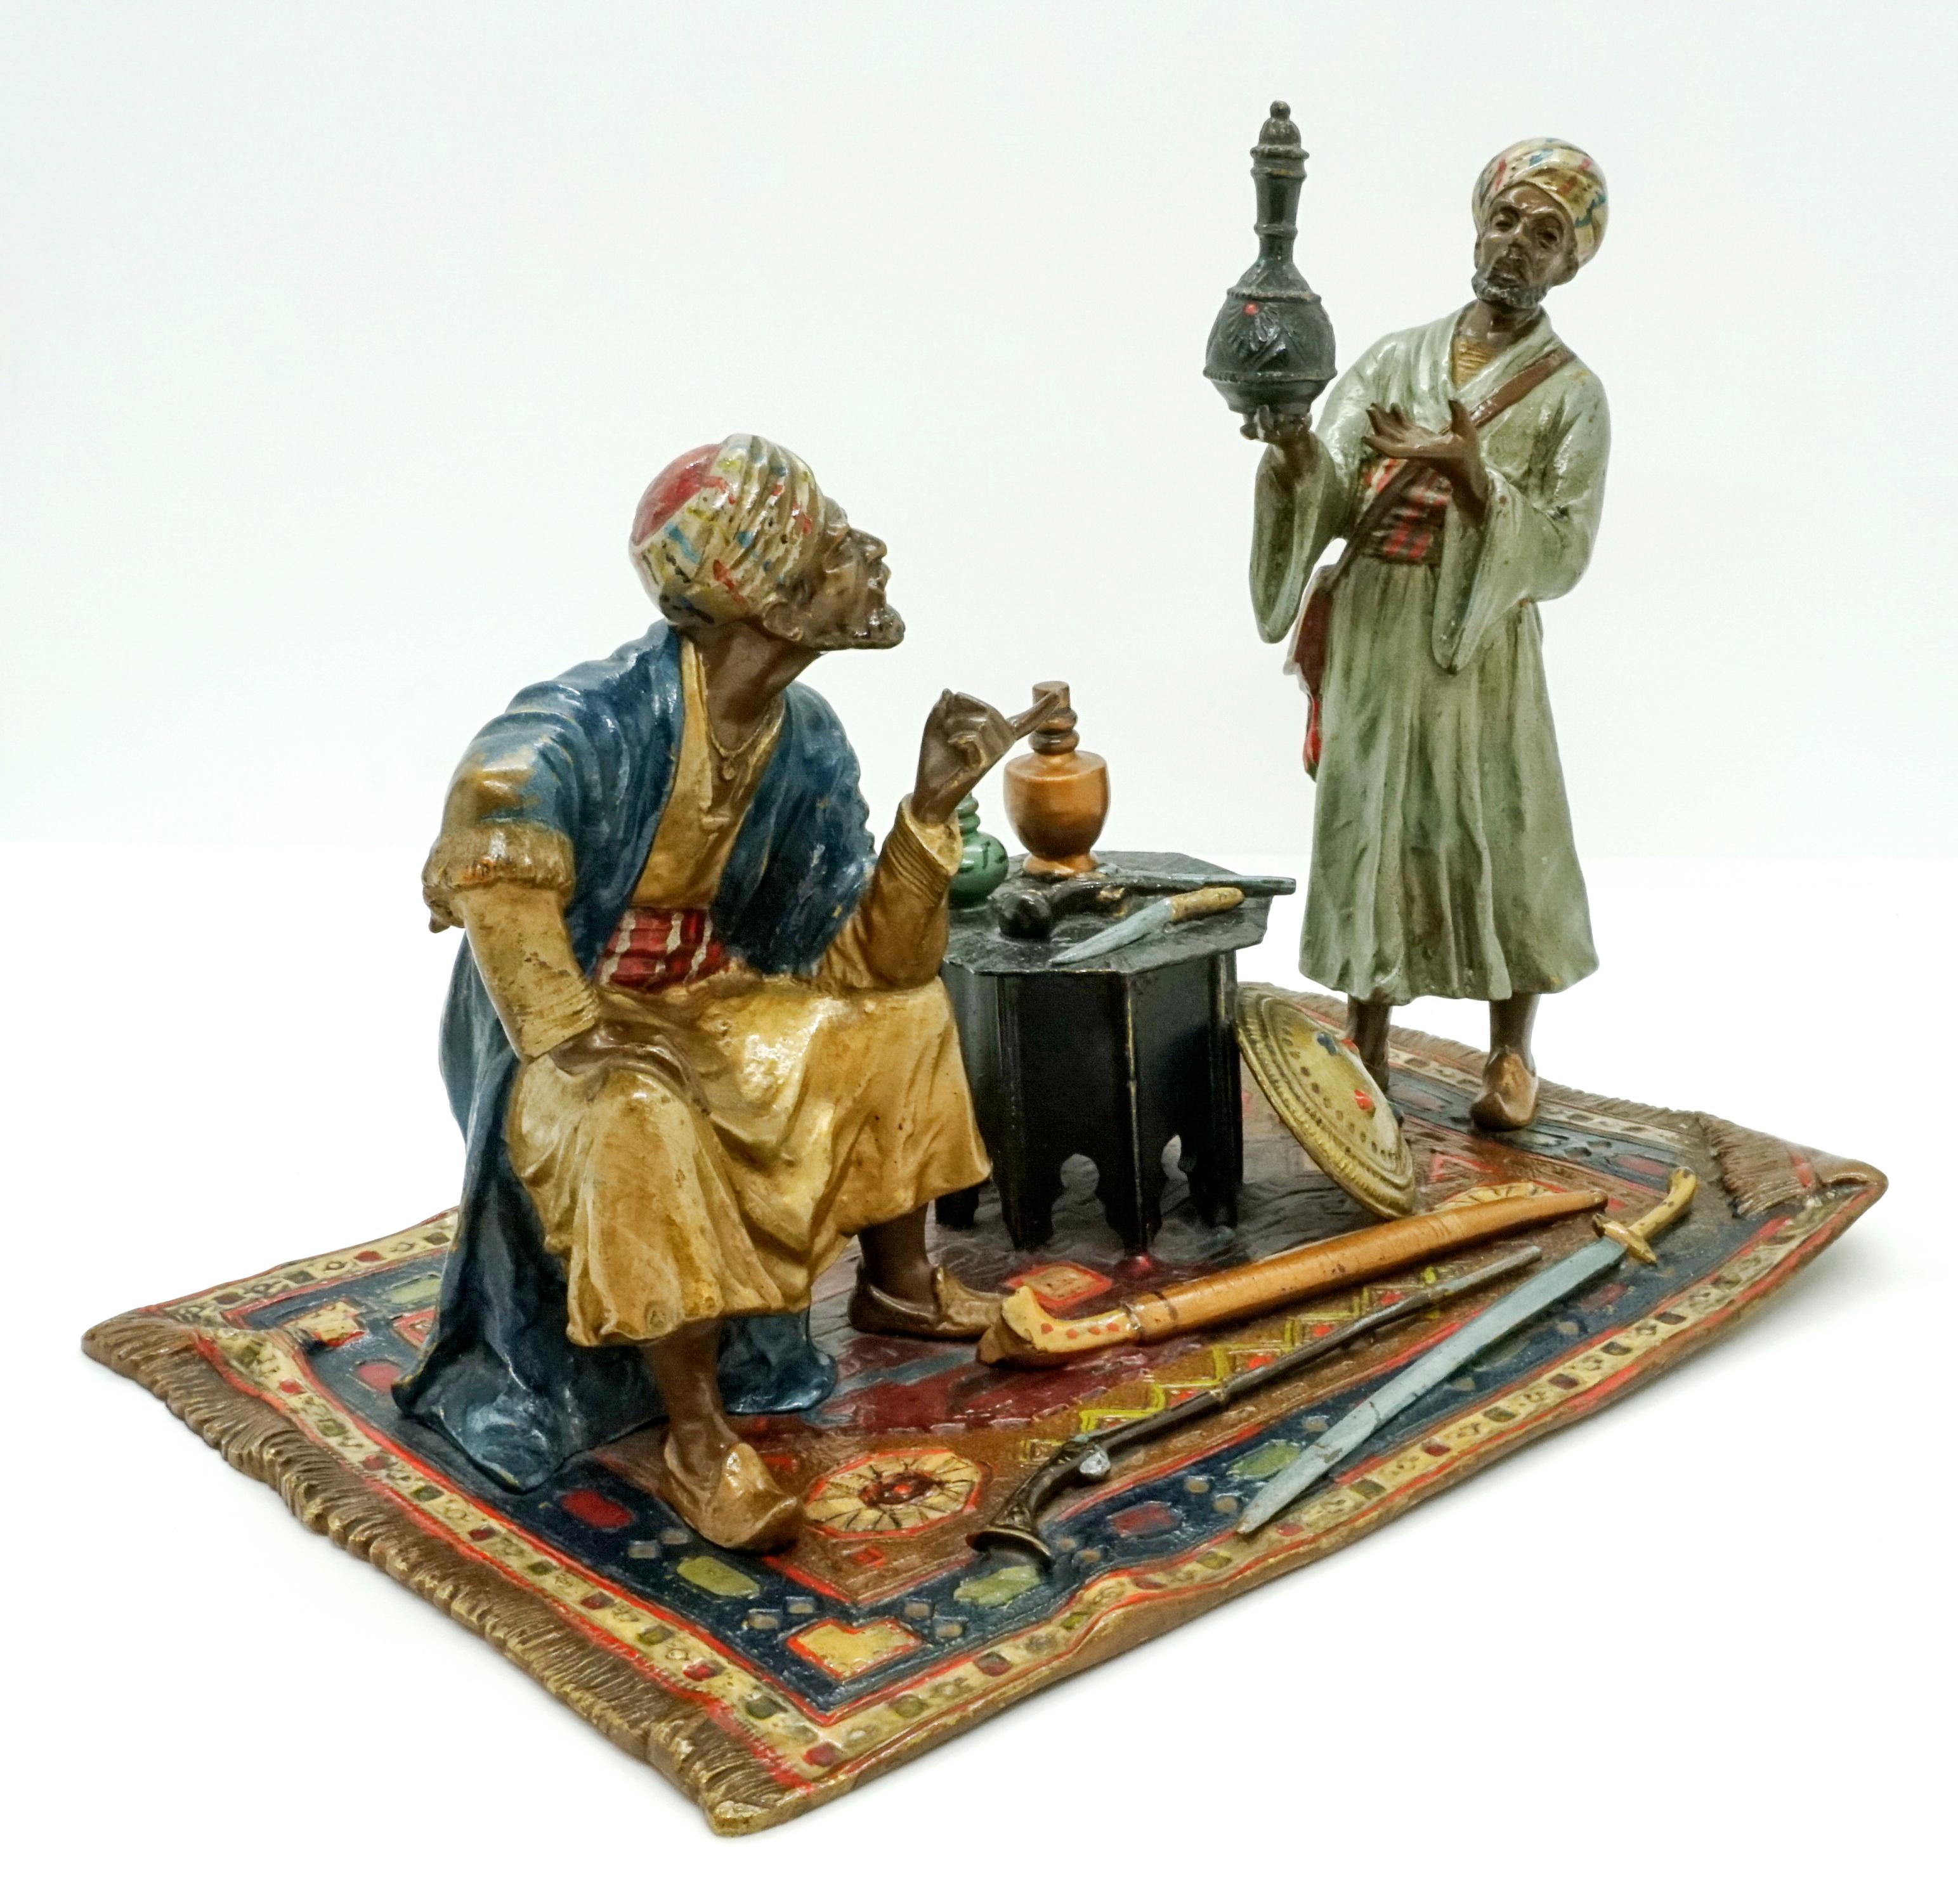 Excellent piece of Viennese bronze Art of 1900

Two Arabs in long robes and turbans talk shop over an oriental, bottle-like vessel. On the little table between the two there are more bottles and antique weapons: a knife and a pistol, in front of